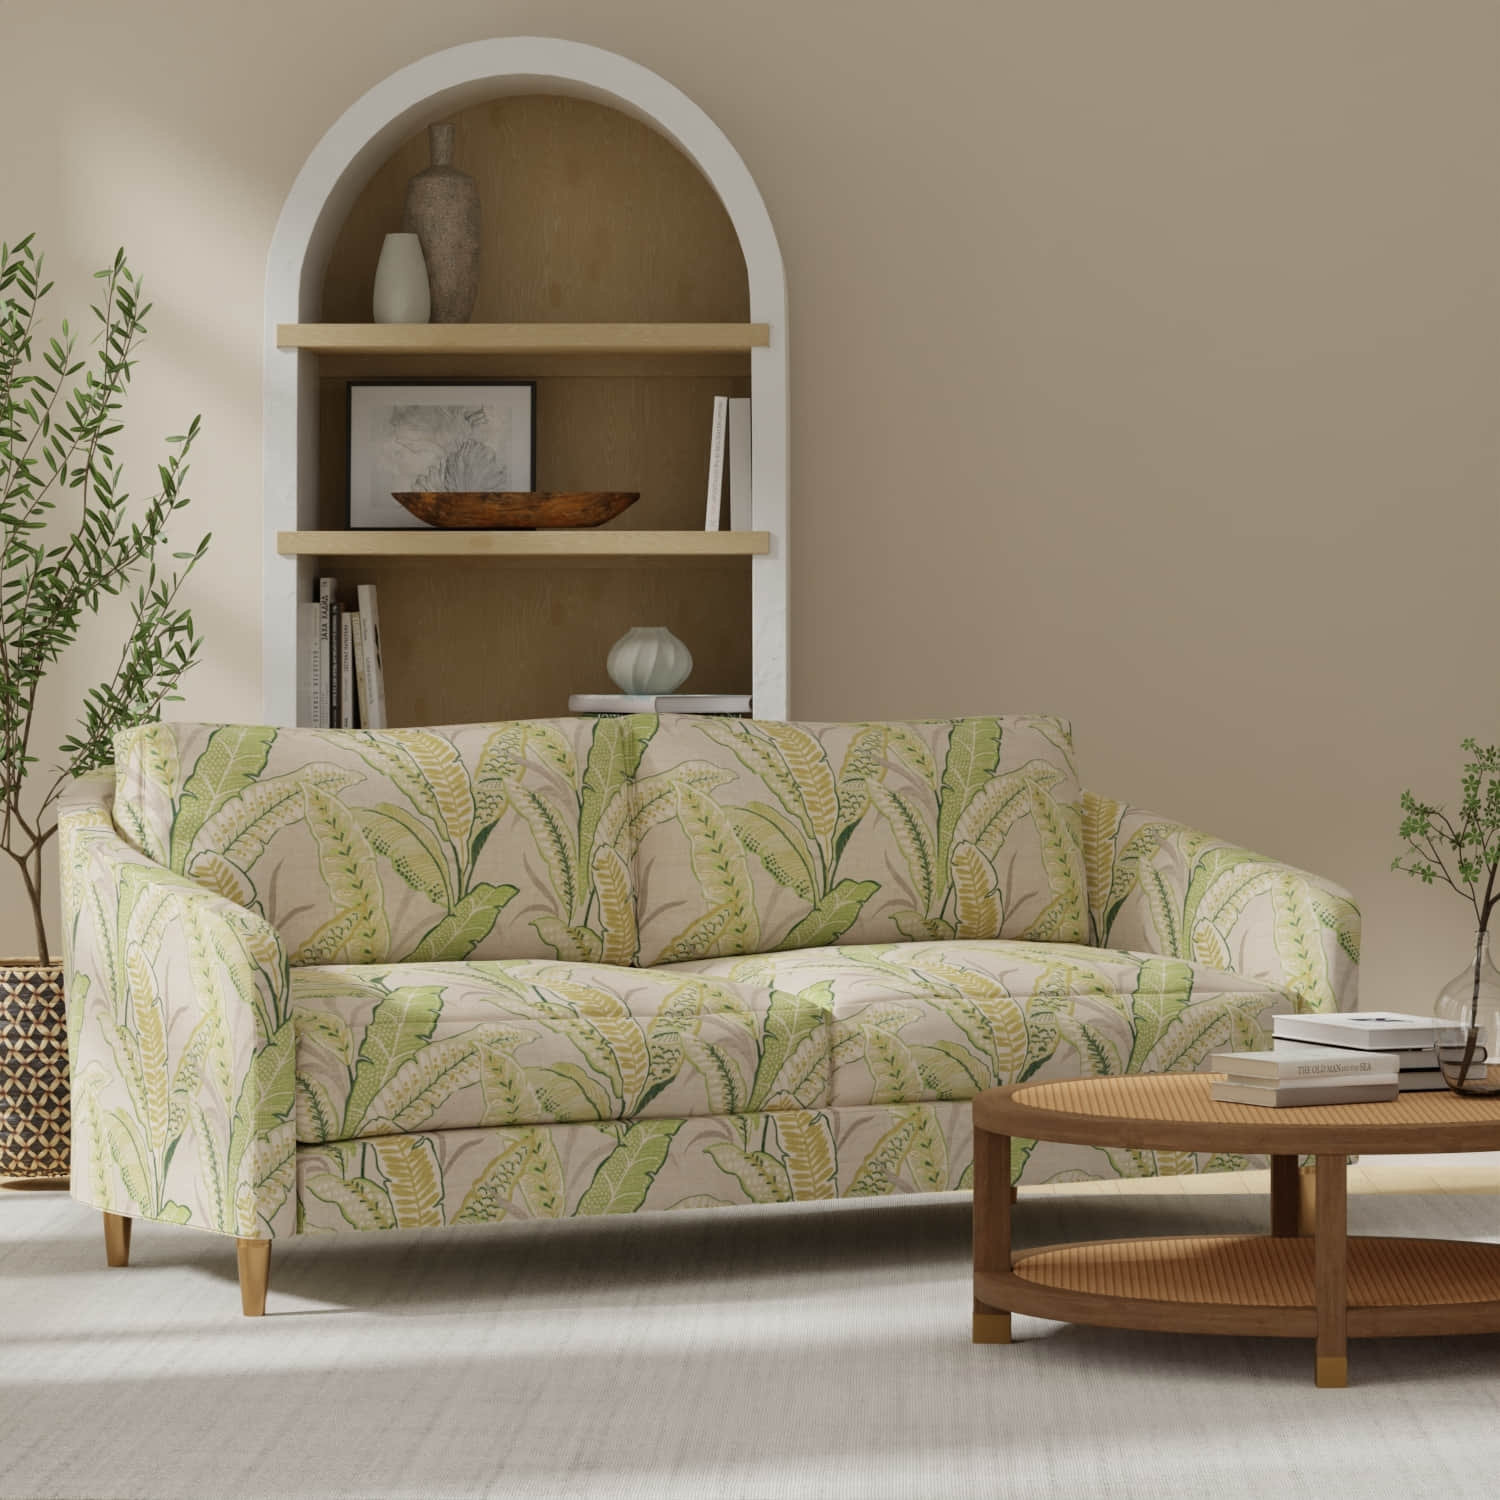 Berkley Leaf upholstered on a couch